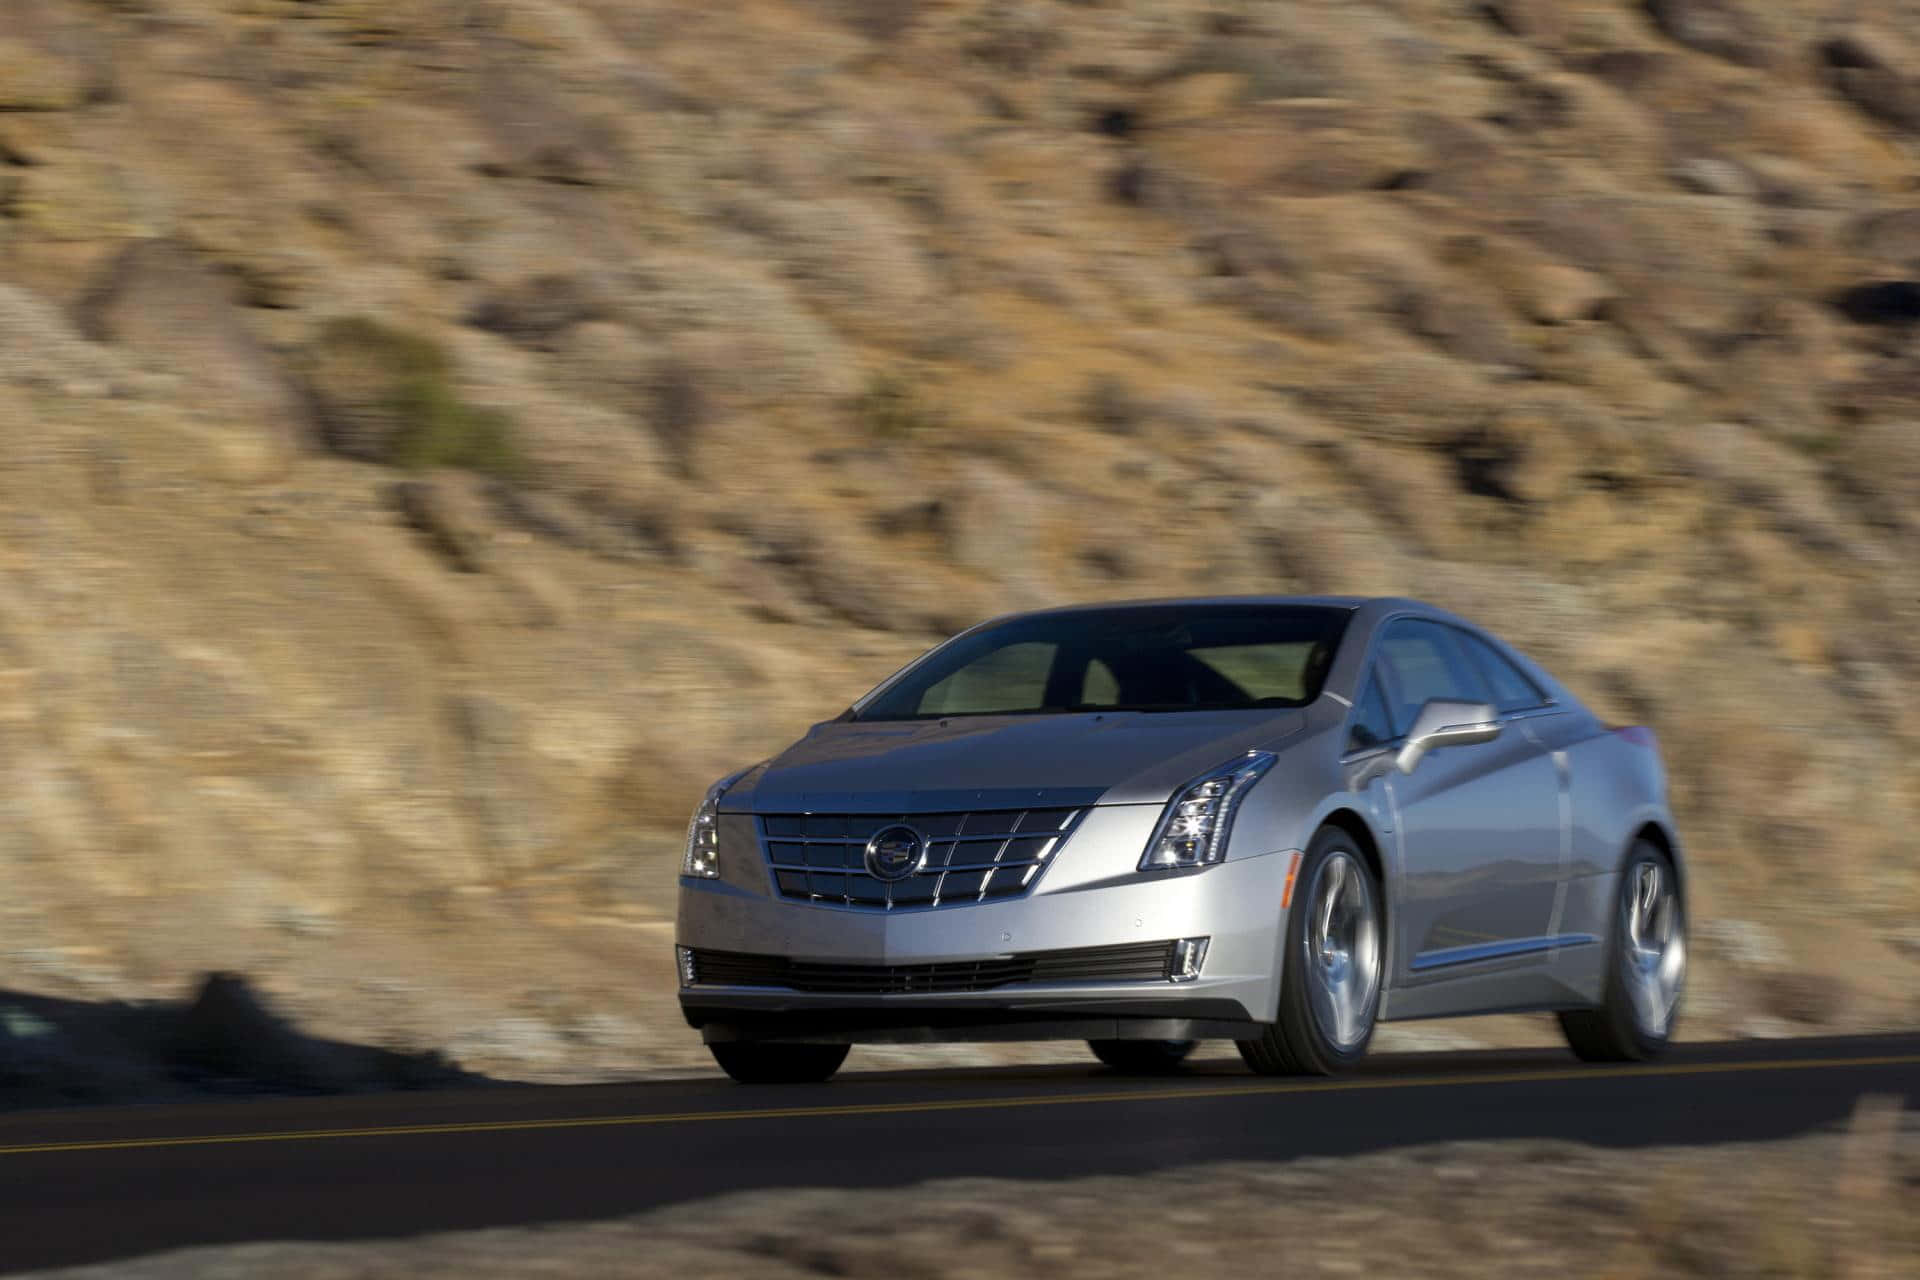 Stunning Cadillac ELR Electric Luxury Coupe on the Road Wallpaper